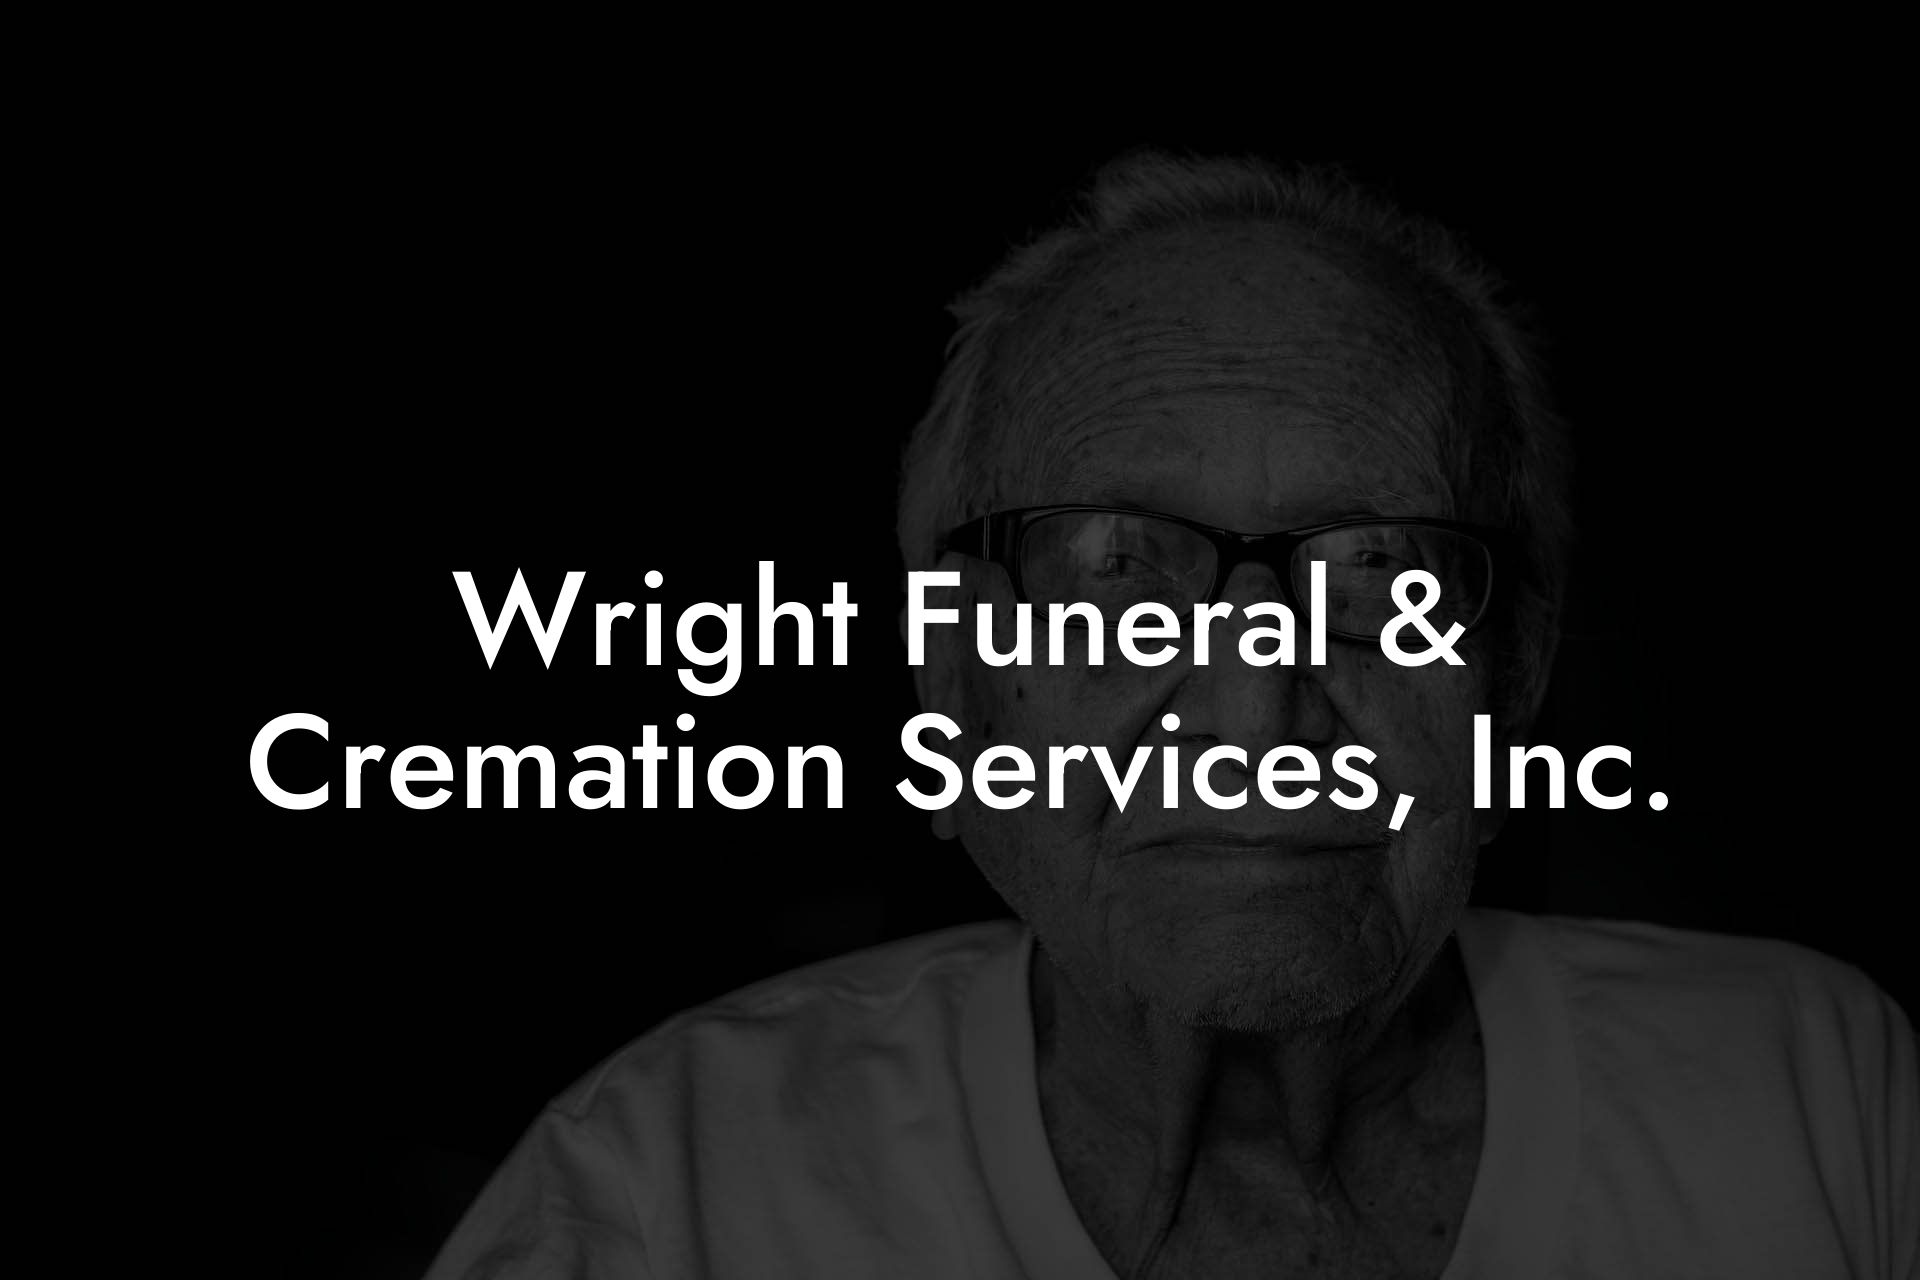 Wright Funeral & Cremation Services, Inc.